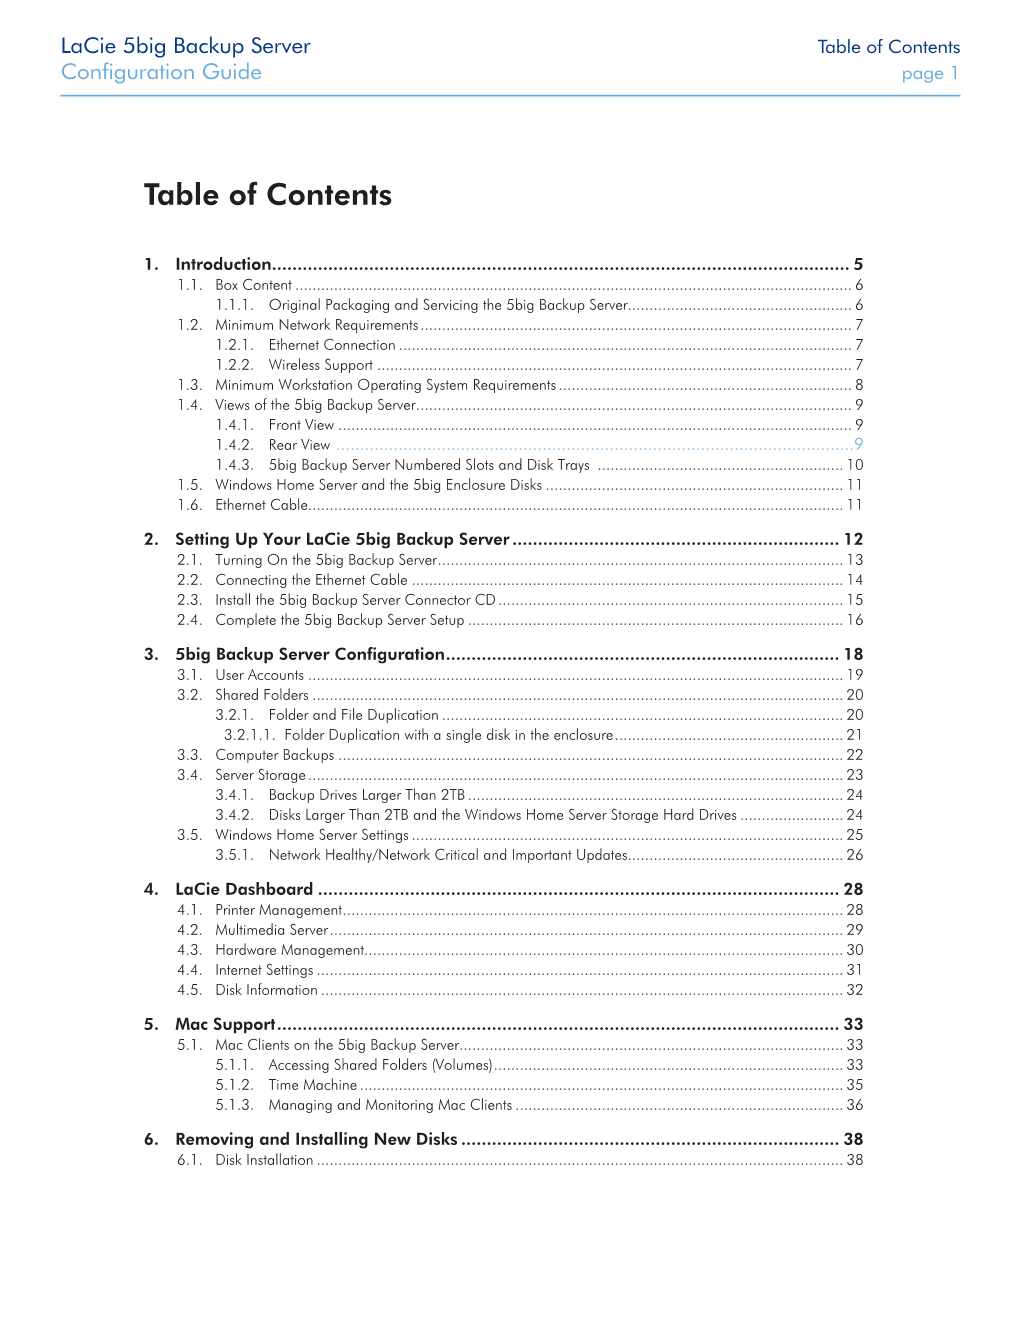 Table of Contents Configuration Guide Page 1